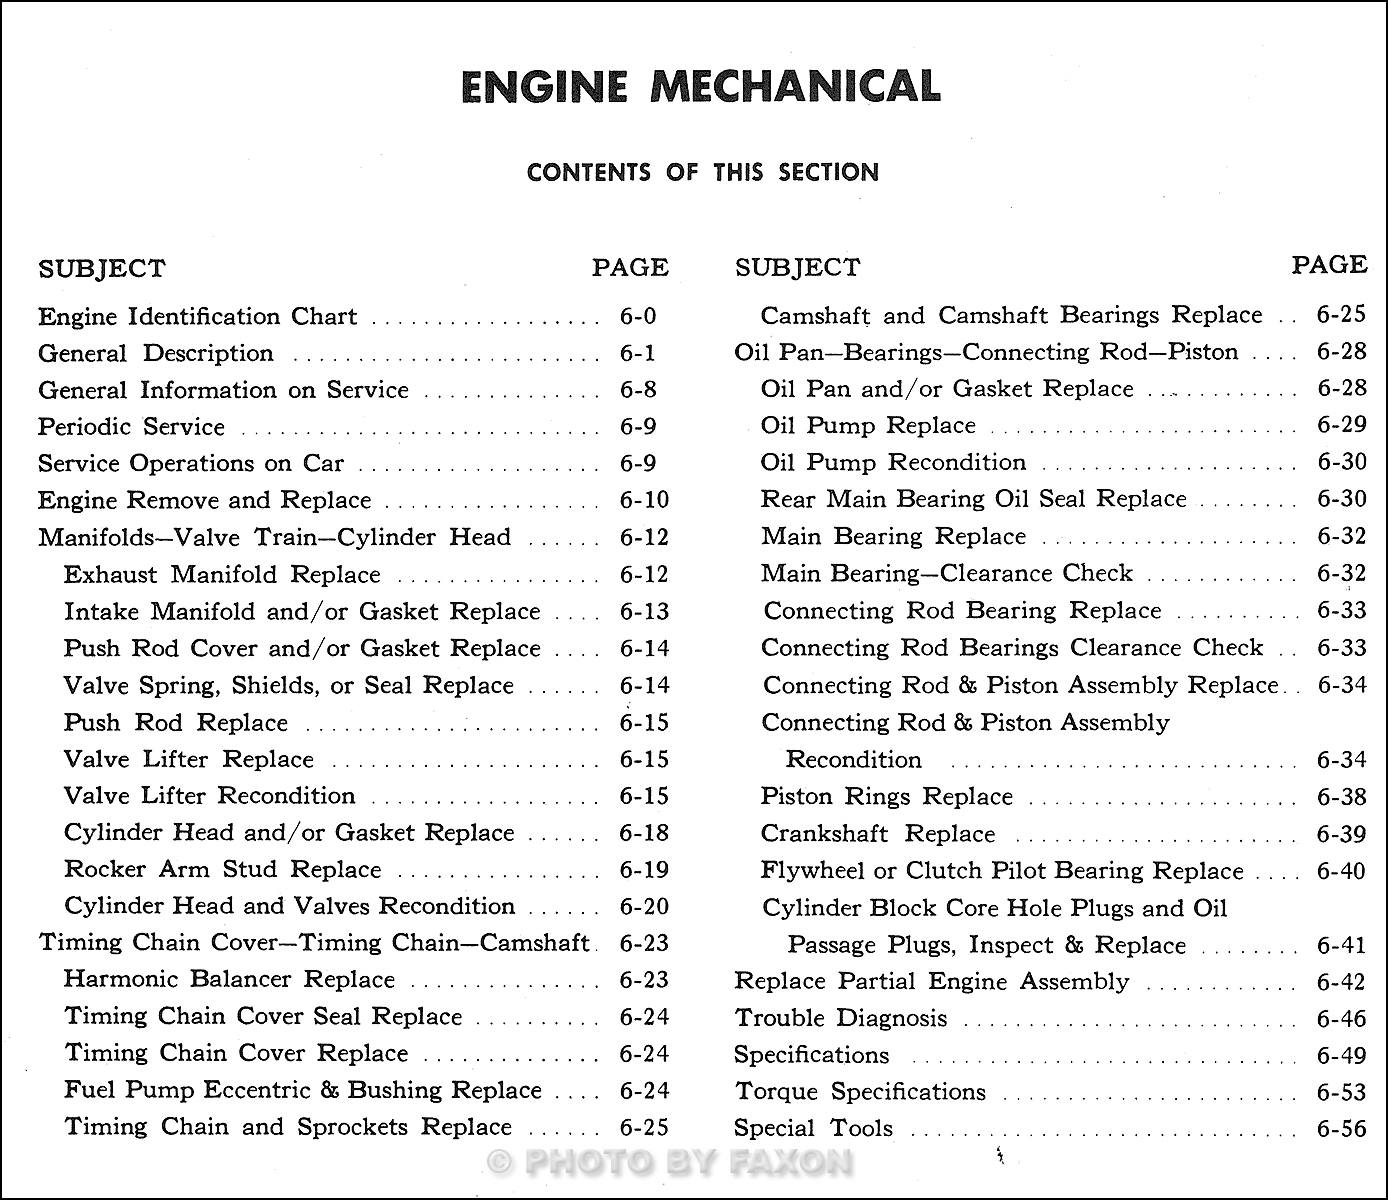 Table of Contents: GTO Engine Mechanical